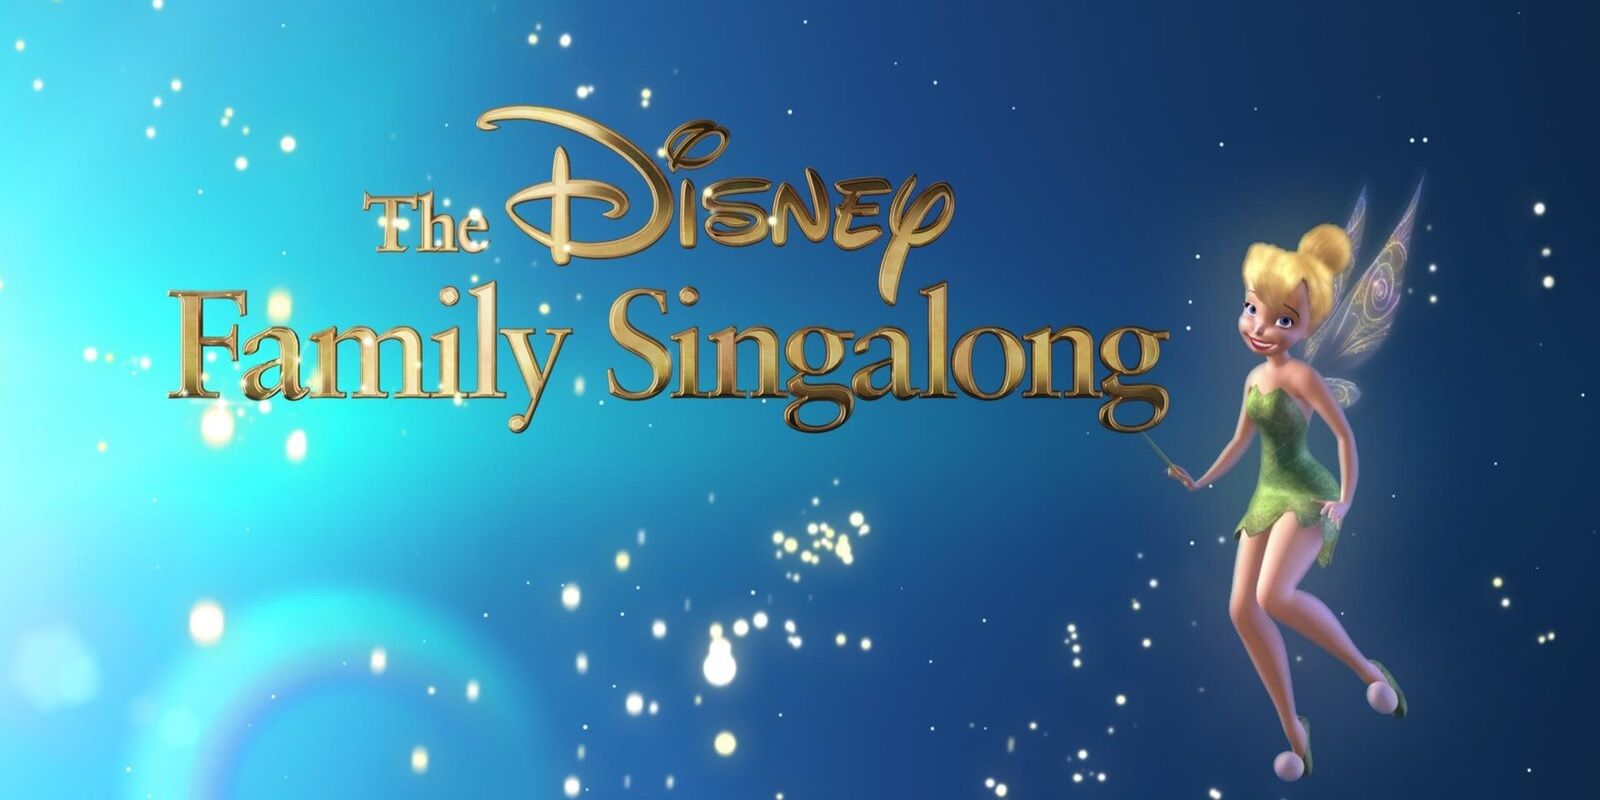 How To Stream The Disney Family Singalong On ABC Without Cable